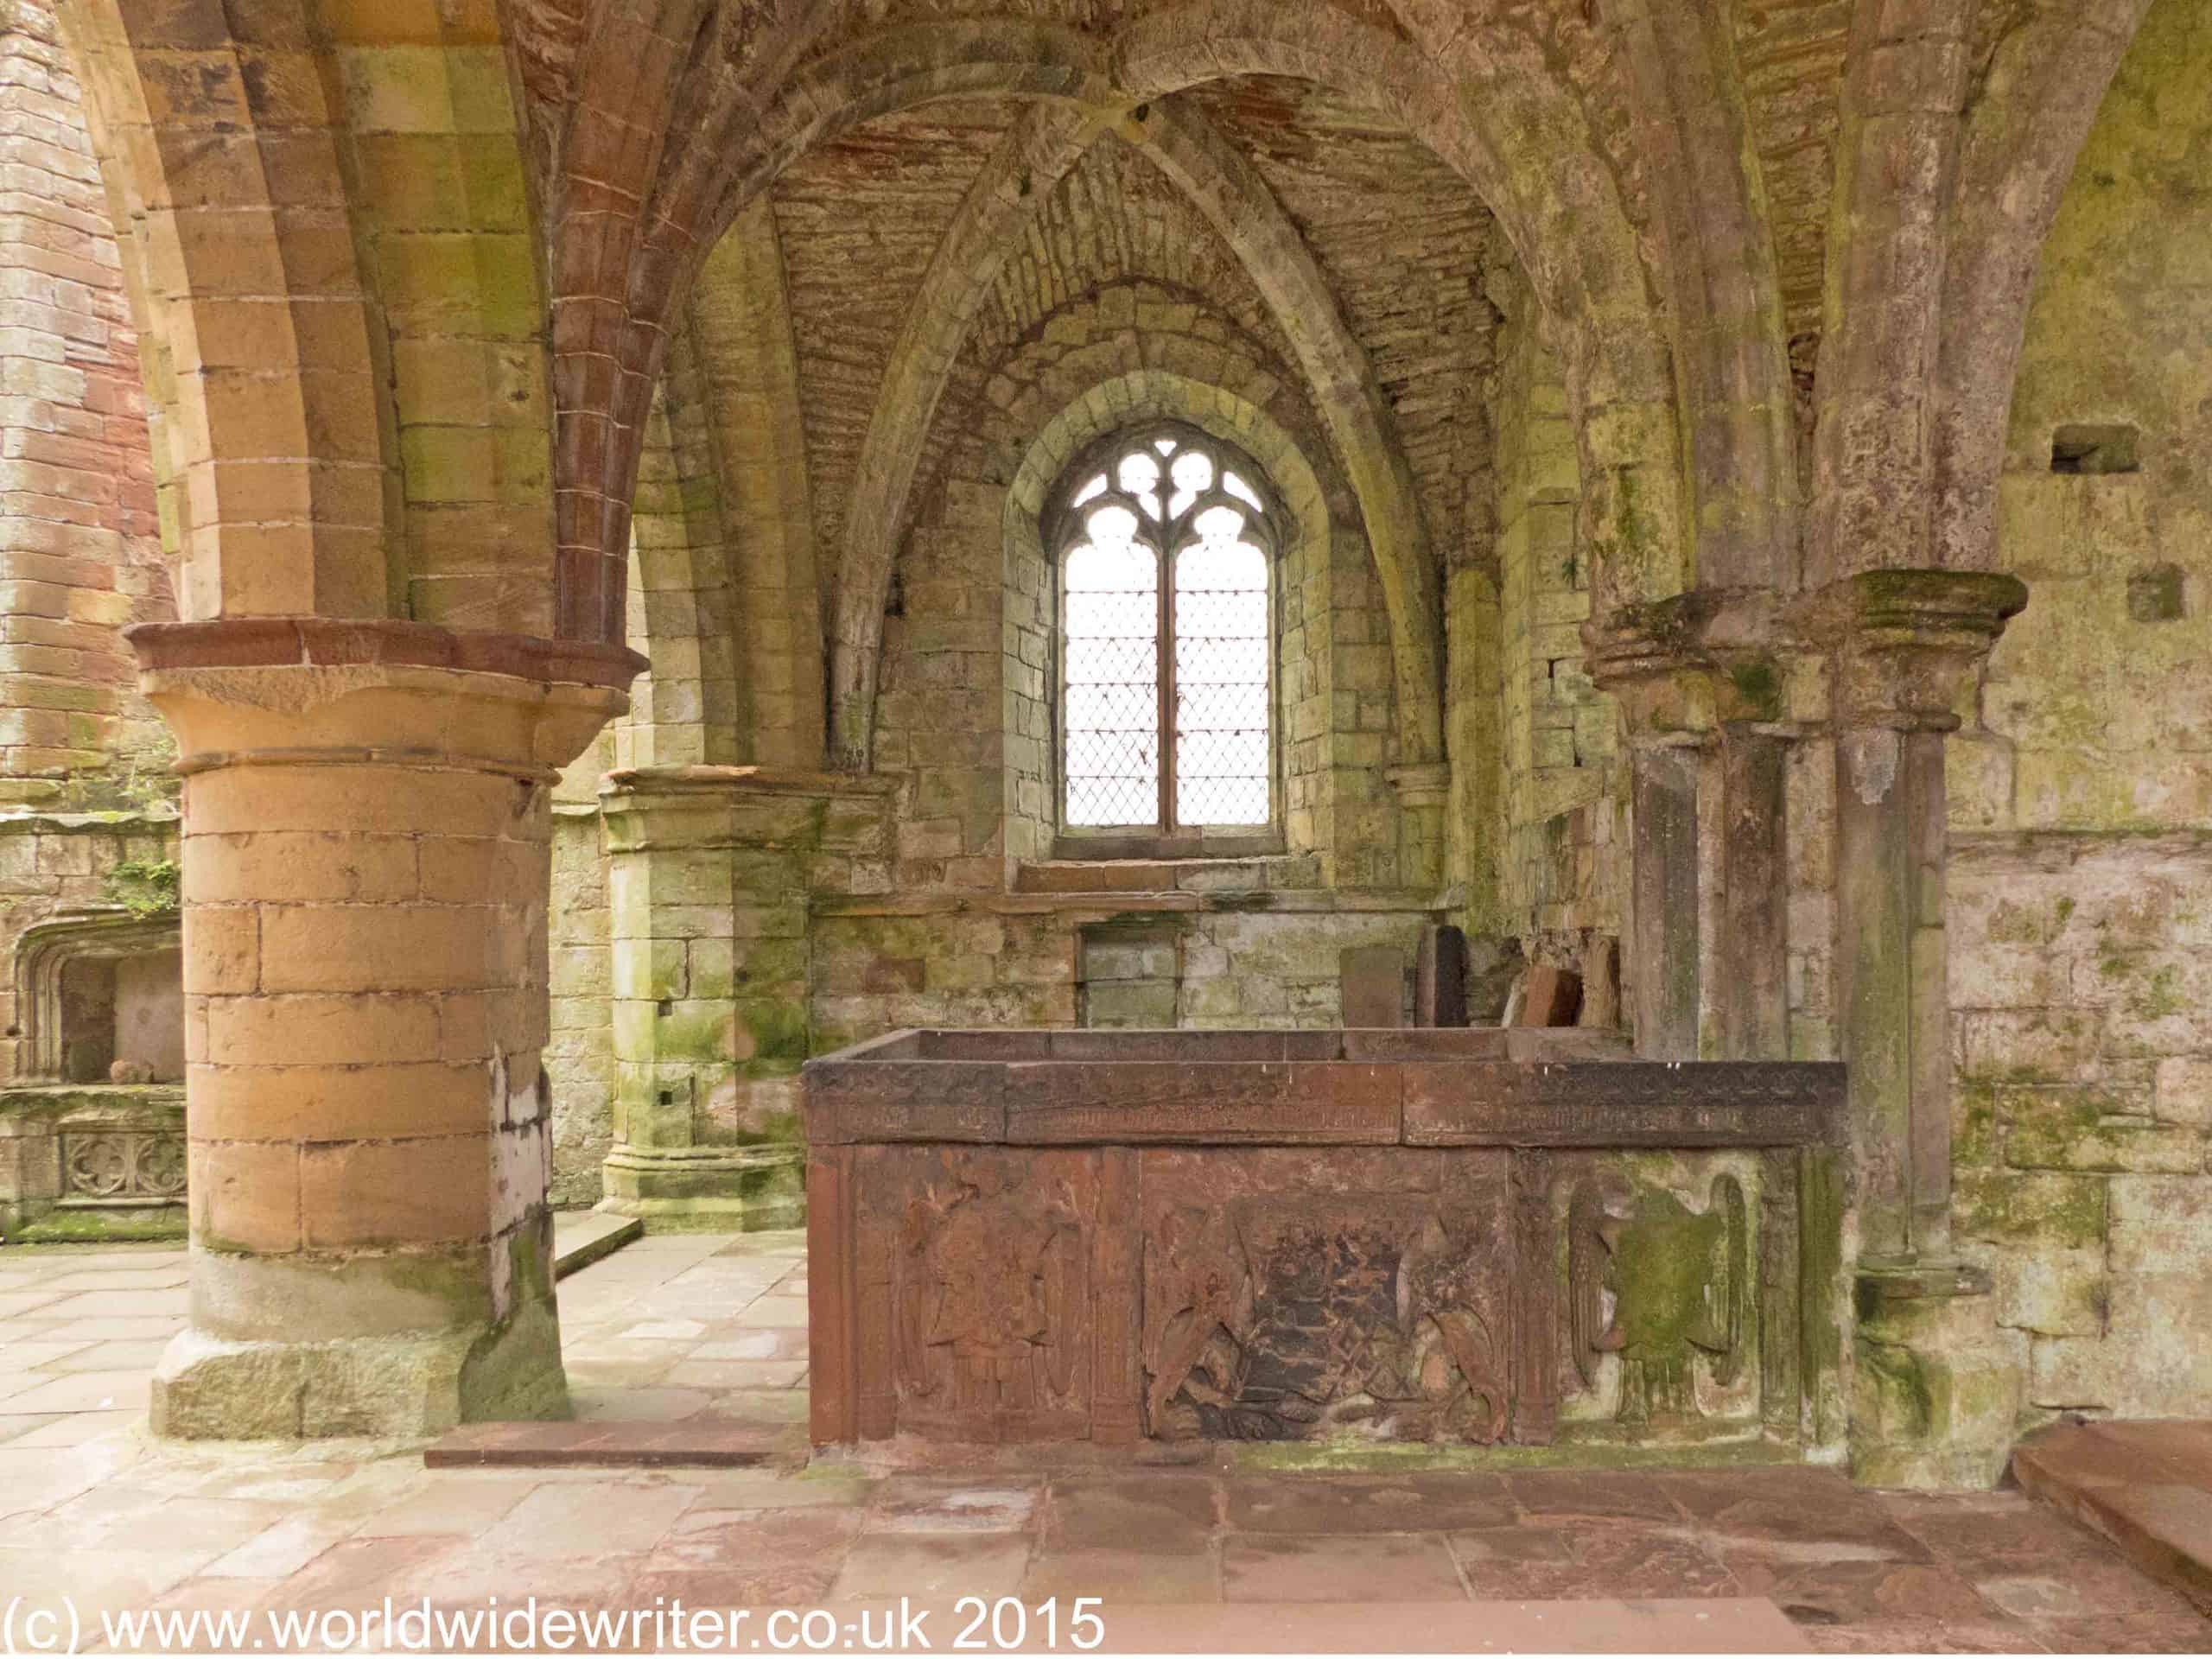 Making Connections: Lanercost Priory And Hadrian’s Wall